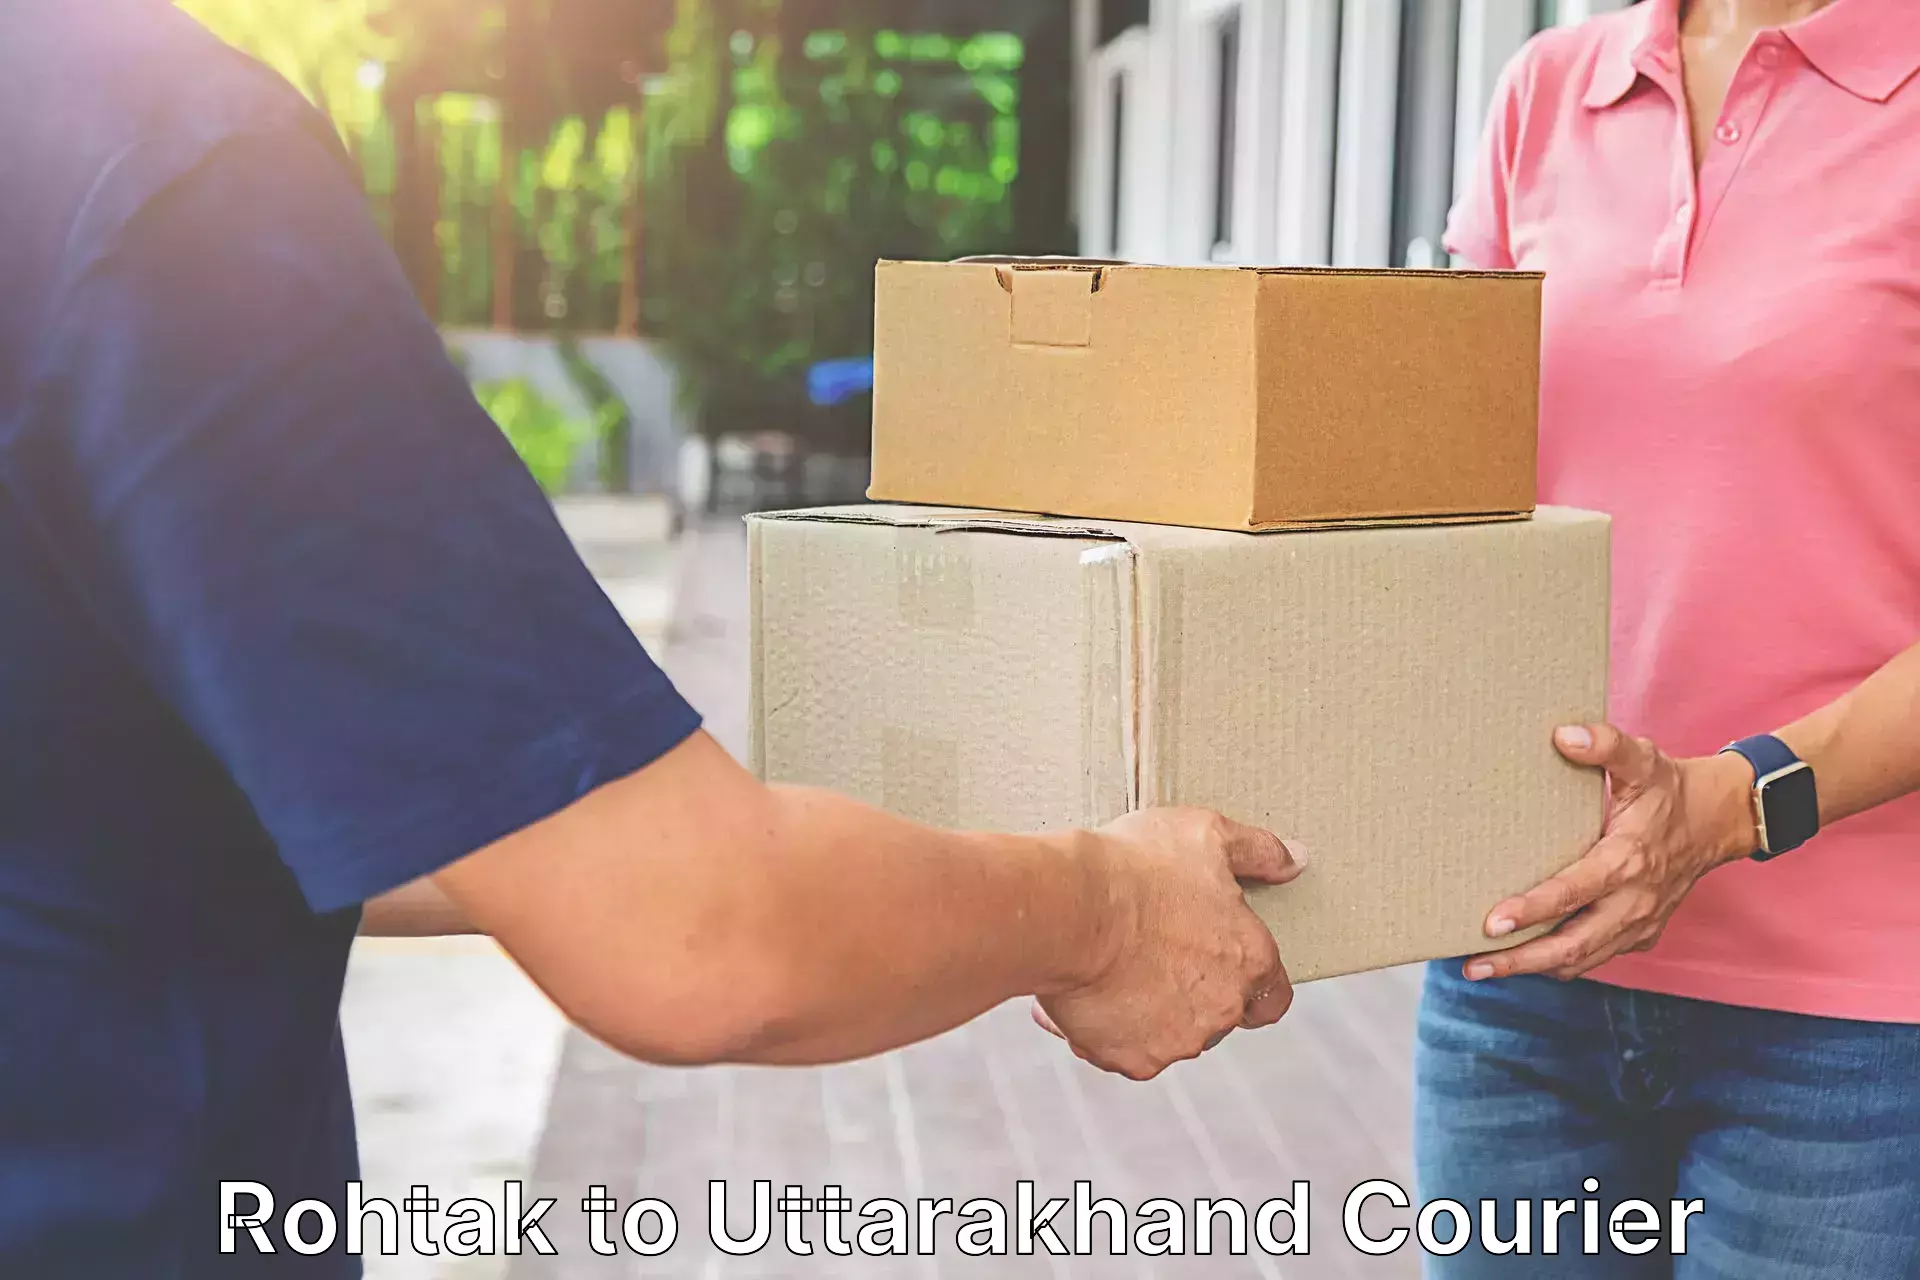 Flexible delivery scheduling Rohtak to Dehradun